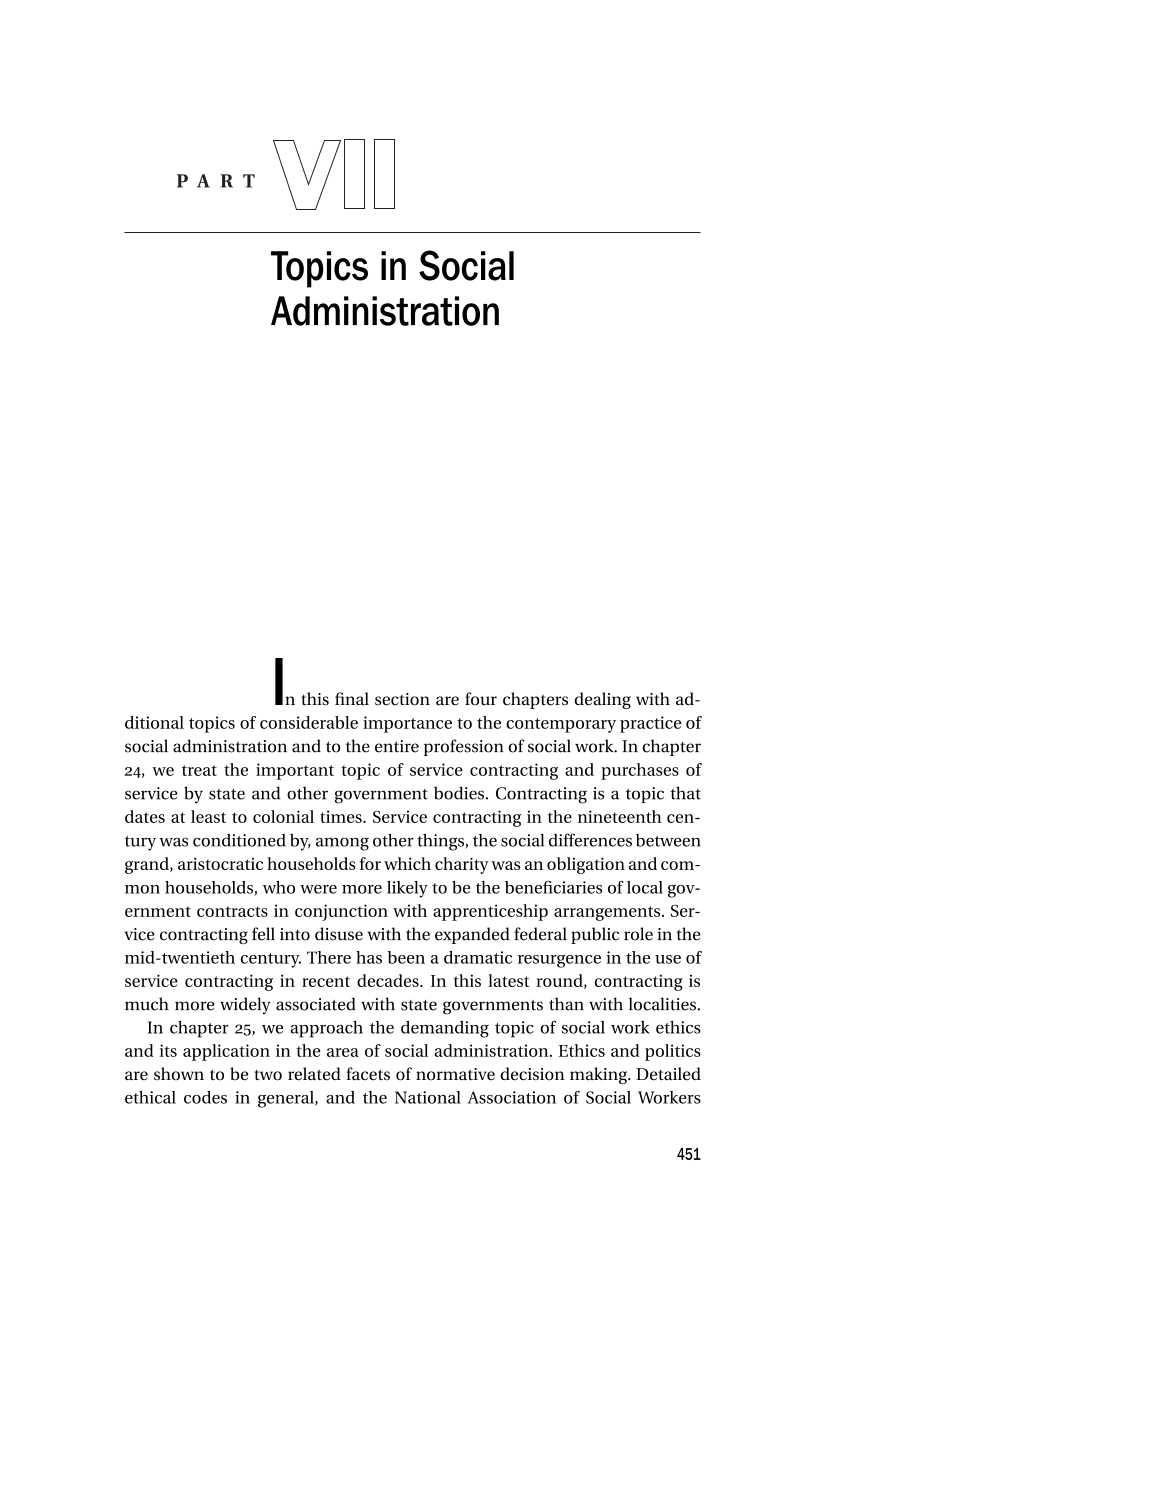 Social Administration page 451